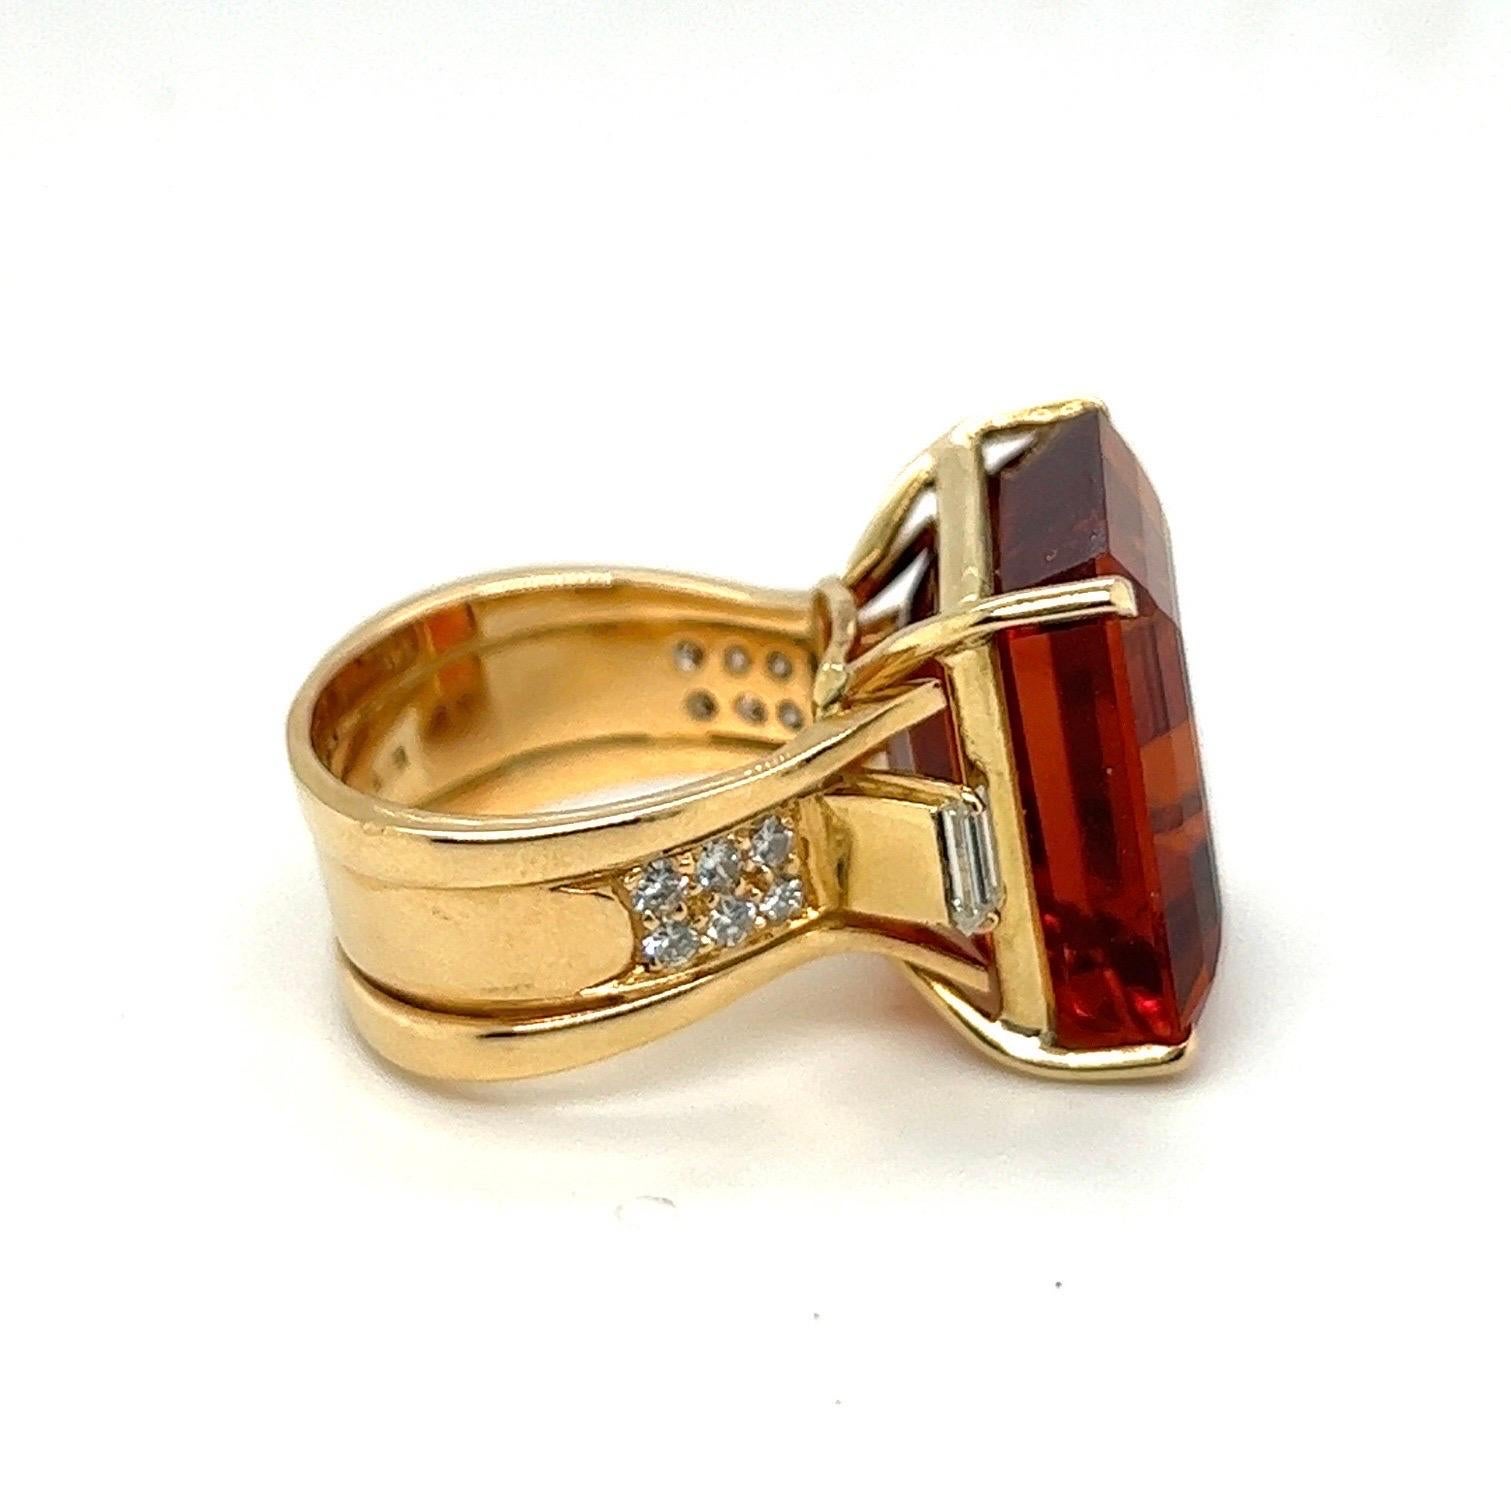 Emerald Cut 18 Karat Yellow Gold Citrine and Diamod Cocktail Ring by Paul Binder, 1980s For Sale